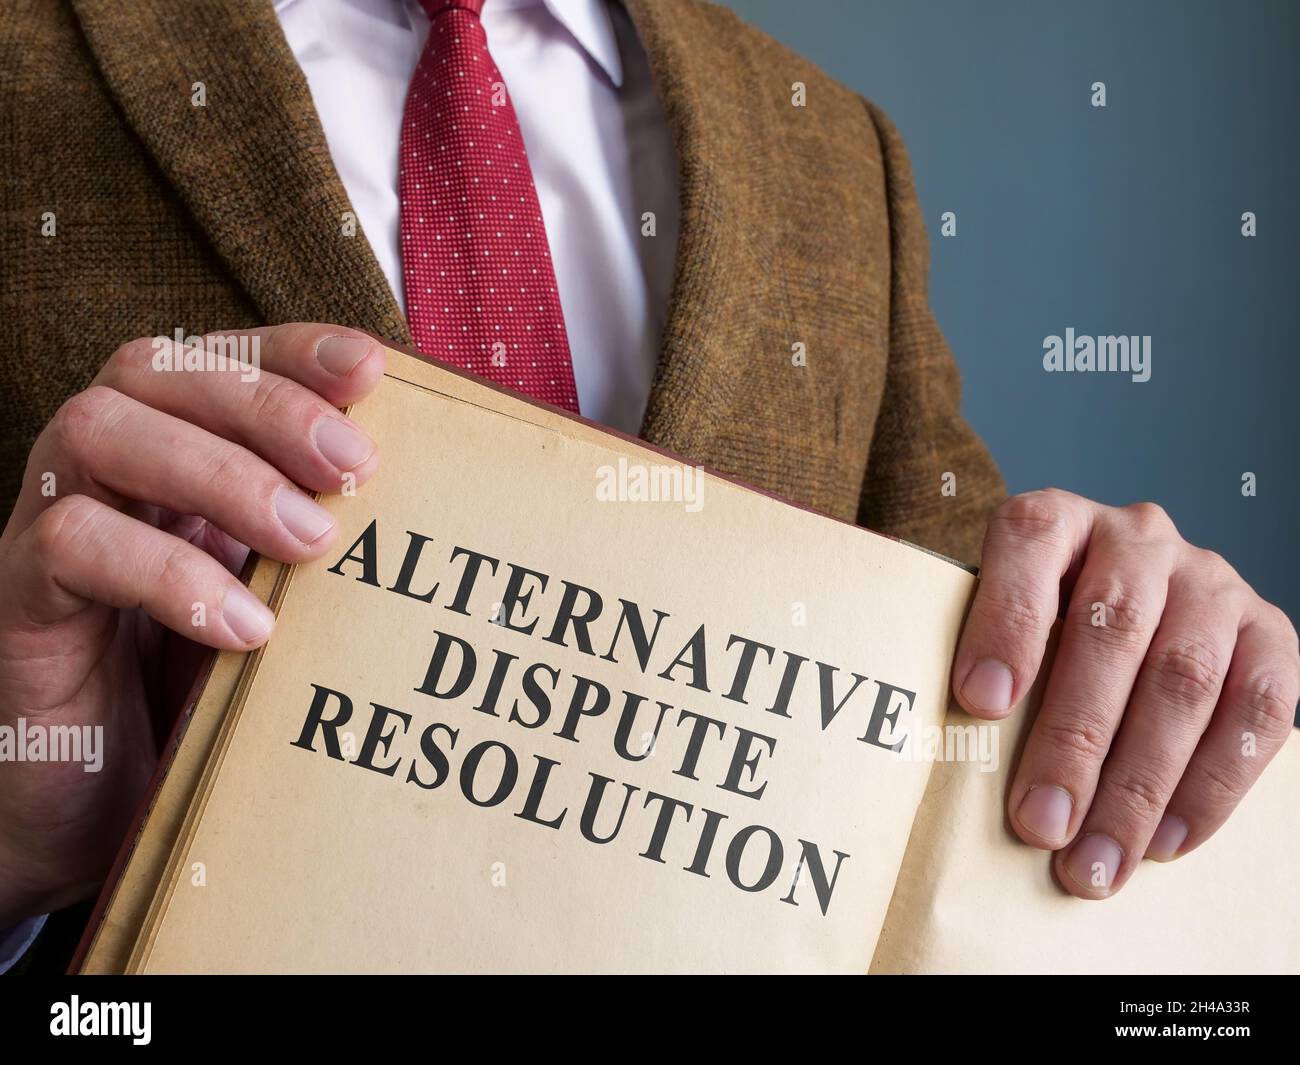 Lawyer shows ADR alternative dispute resolution methods in the book. Stock Photo